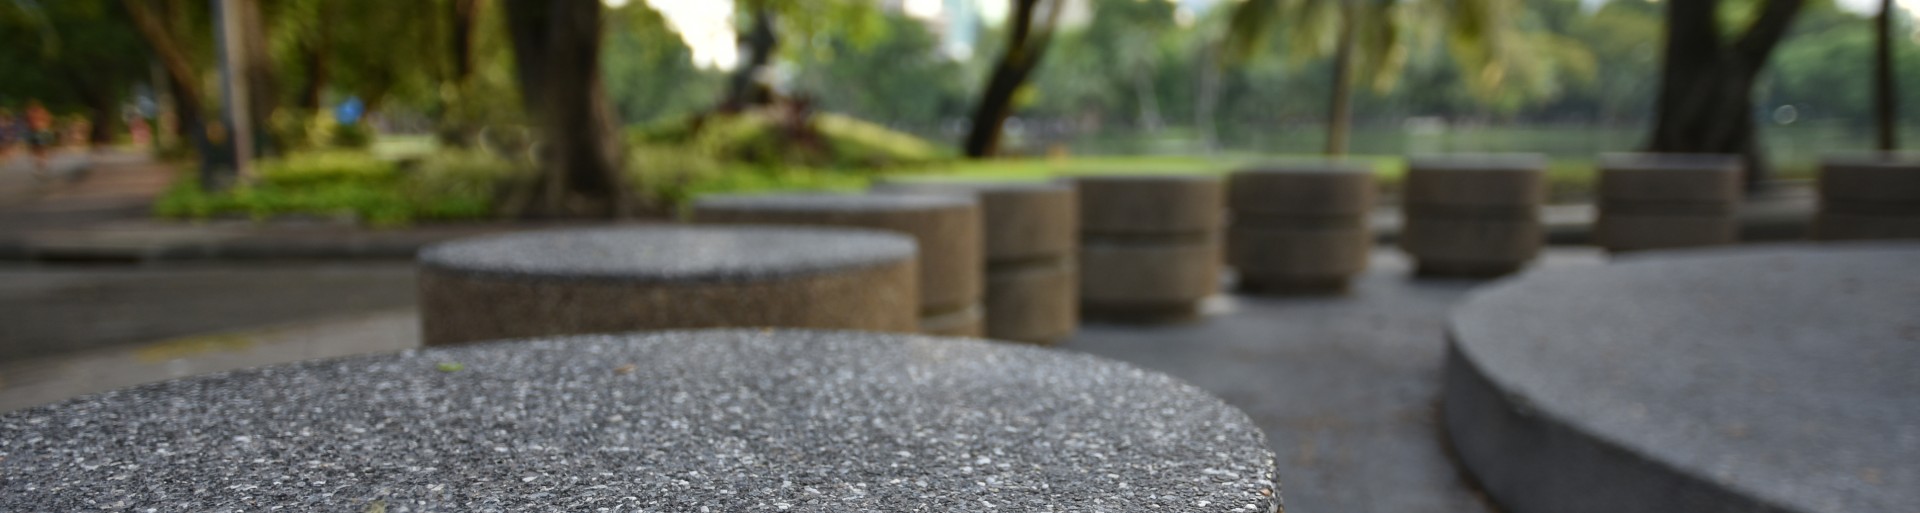 Circular ordered stone bollards with a background of grass and tree-trunks